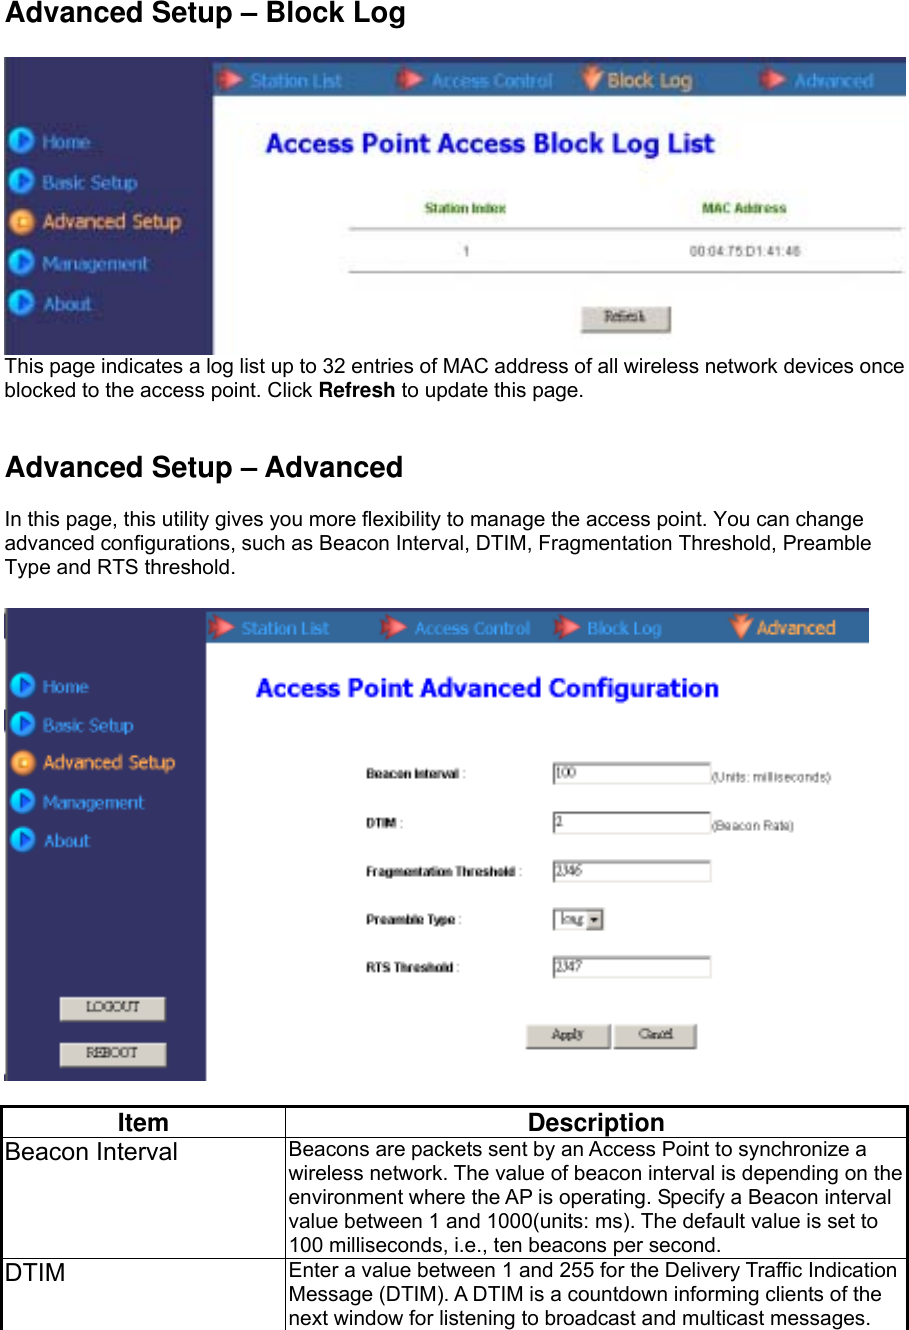 Advanced Setup – Block Log   This page indicates a log list up to 32 entries of MAC address of all wireless network devices once blocked to the access point. Click Refresh to update this page.   Advanced Setup – Advanced  In this page, this utility gives you more flexibility to manage the access point. You can change advanced configurations, such as Beacon Interval, DTIM, Fragmentation Threshold, Preamble Type and RTS threshold.    Item Description Beacon Interval  Beacons are packets sent by an Access Point to synchronize a wireless network. The value of beacon interval is depending on the environment where the AP is operating. Specify a Beacon interval value between 1 and 1000(units: ms). The default value is set to 100 milliseconds, i.e., ten beacons per second.   DTIM  Enter a value between 1 and 255 for the Delivery Traffic Indication Message (DTIM). A DTIM is a countdown informing clients of the next window for listening to broadcast and multicast messages. 